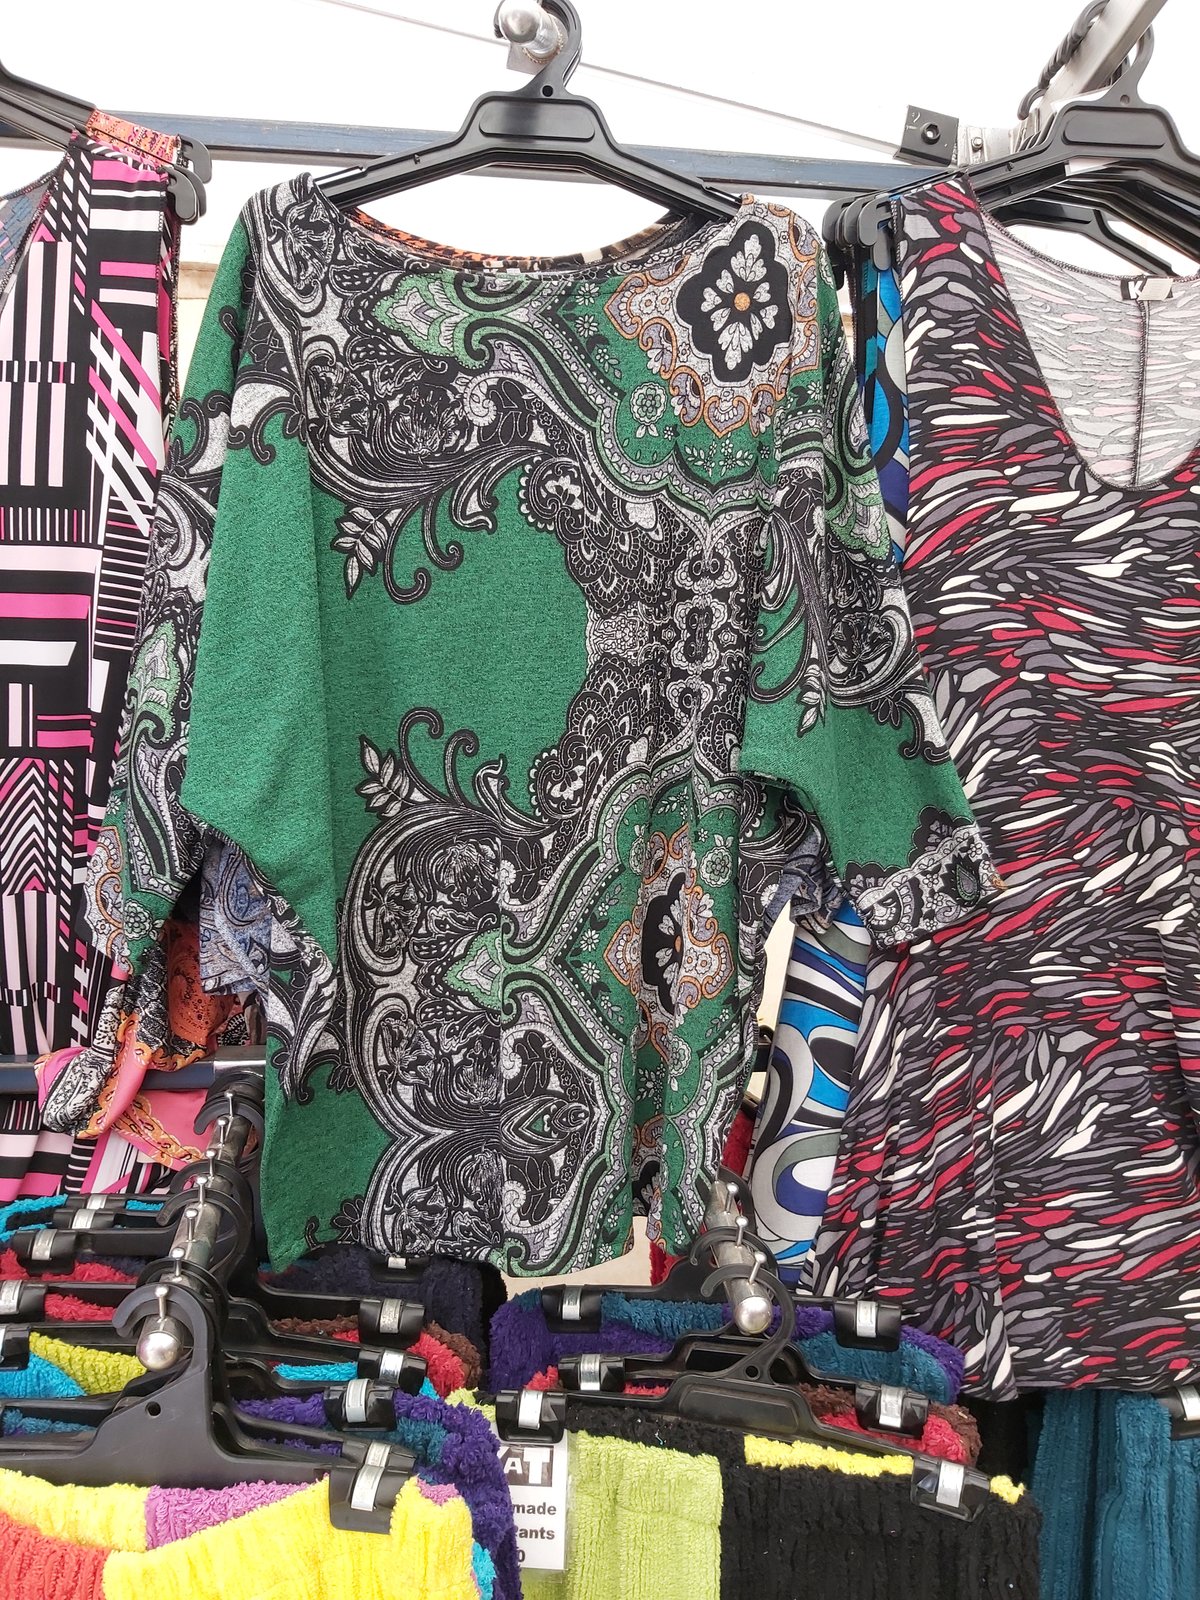 Image of Batwing top/dress in Green Paisley 